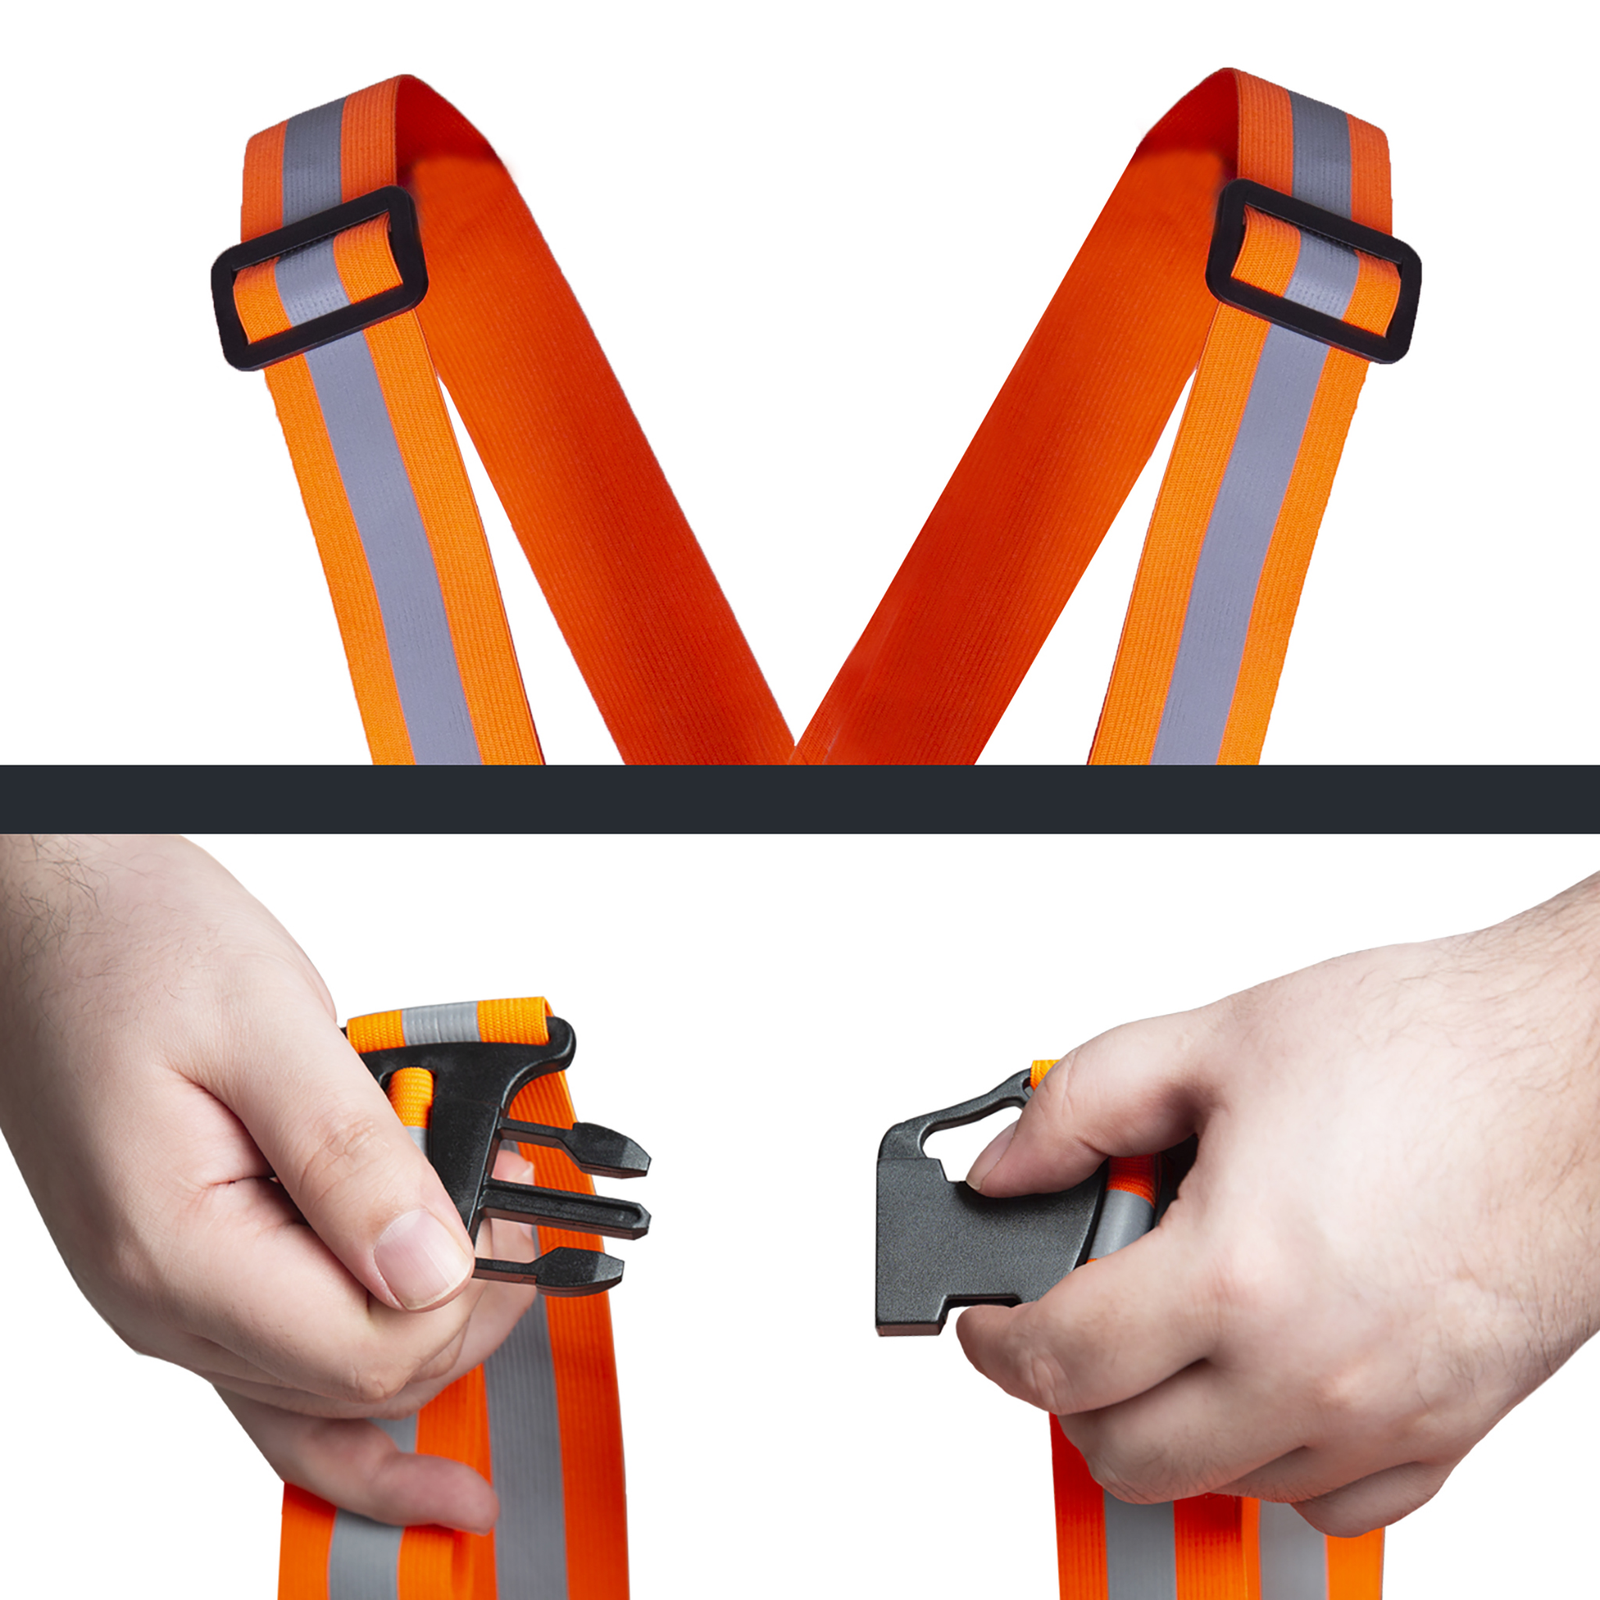 Features the adjustable straps and the closing system on the orange JORESTECH reflective suspenders